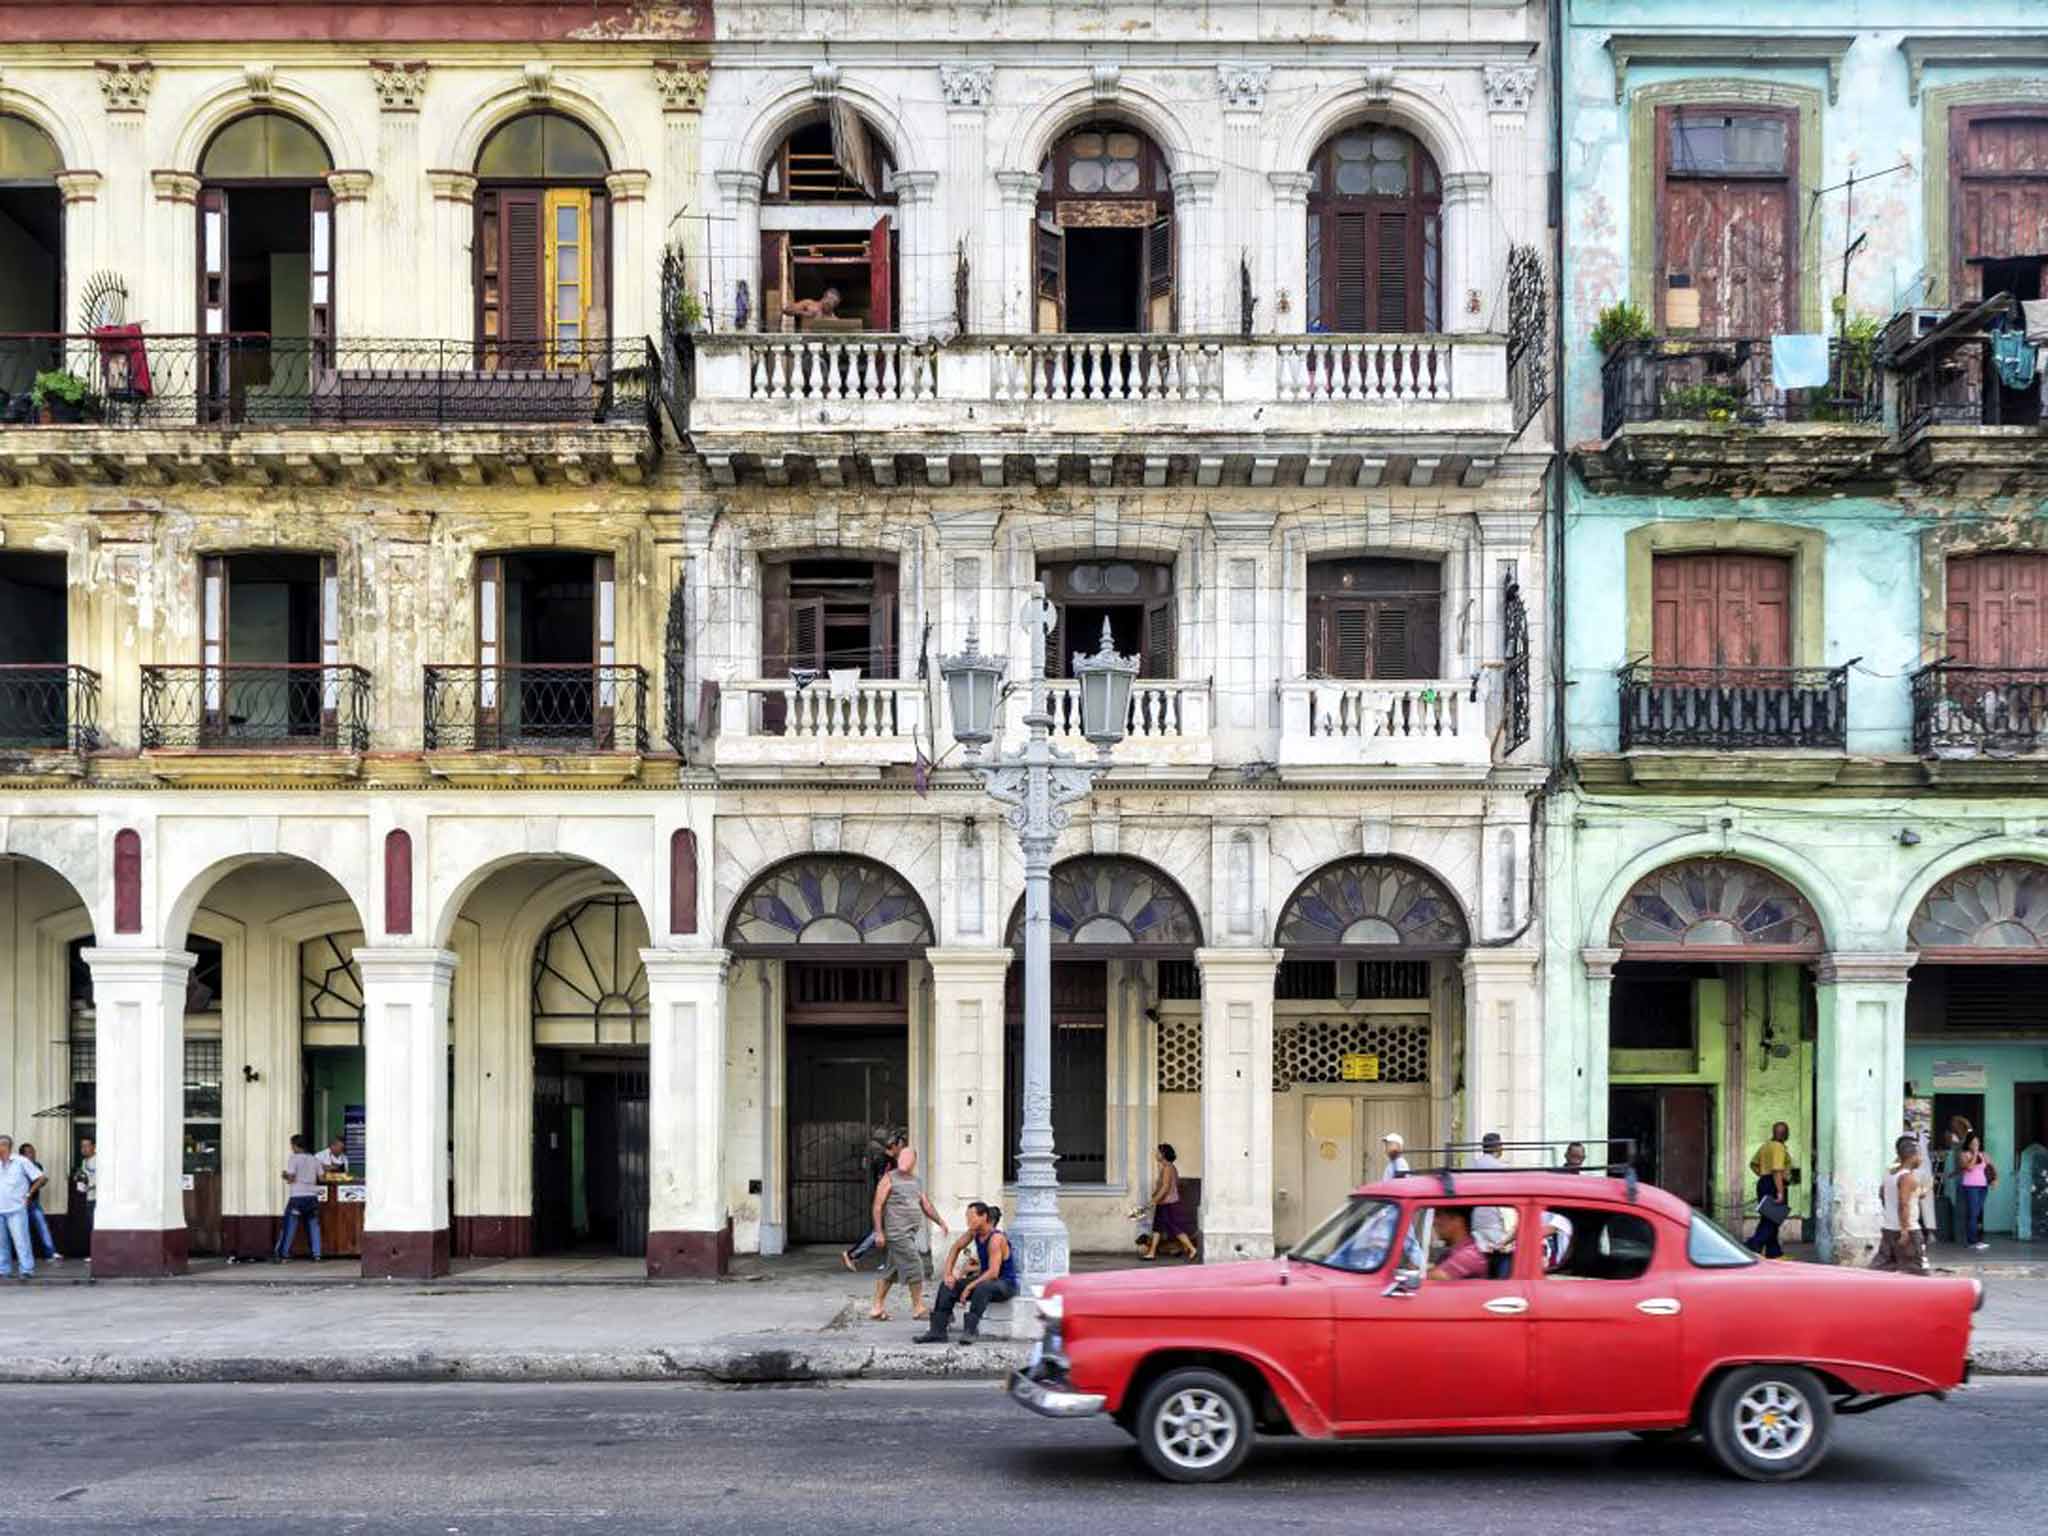 Take the wheel: hire a car in Havana to explore the rest of the island